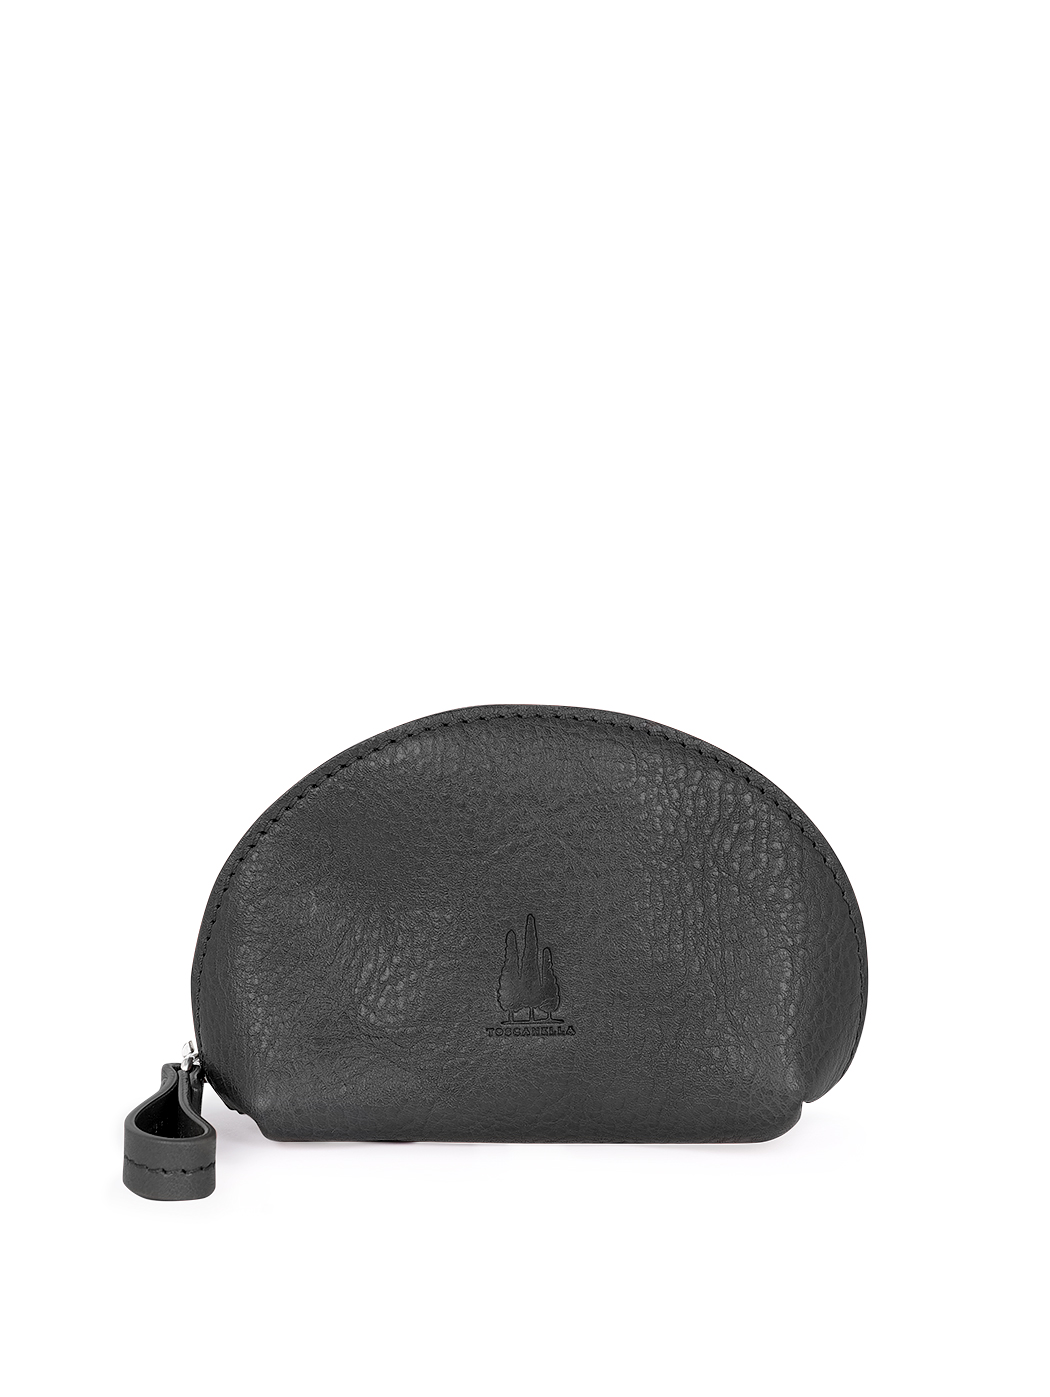 Women's Medium Clamshell Pouch in Leather Black